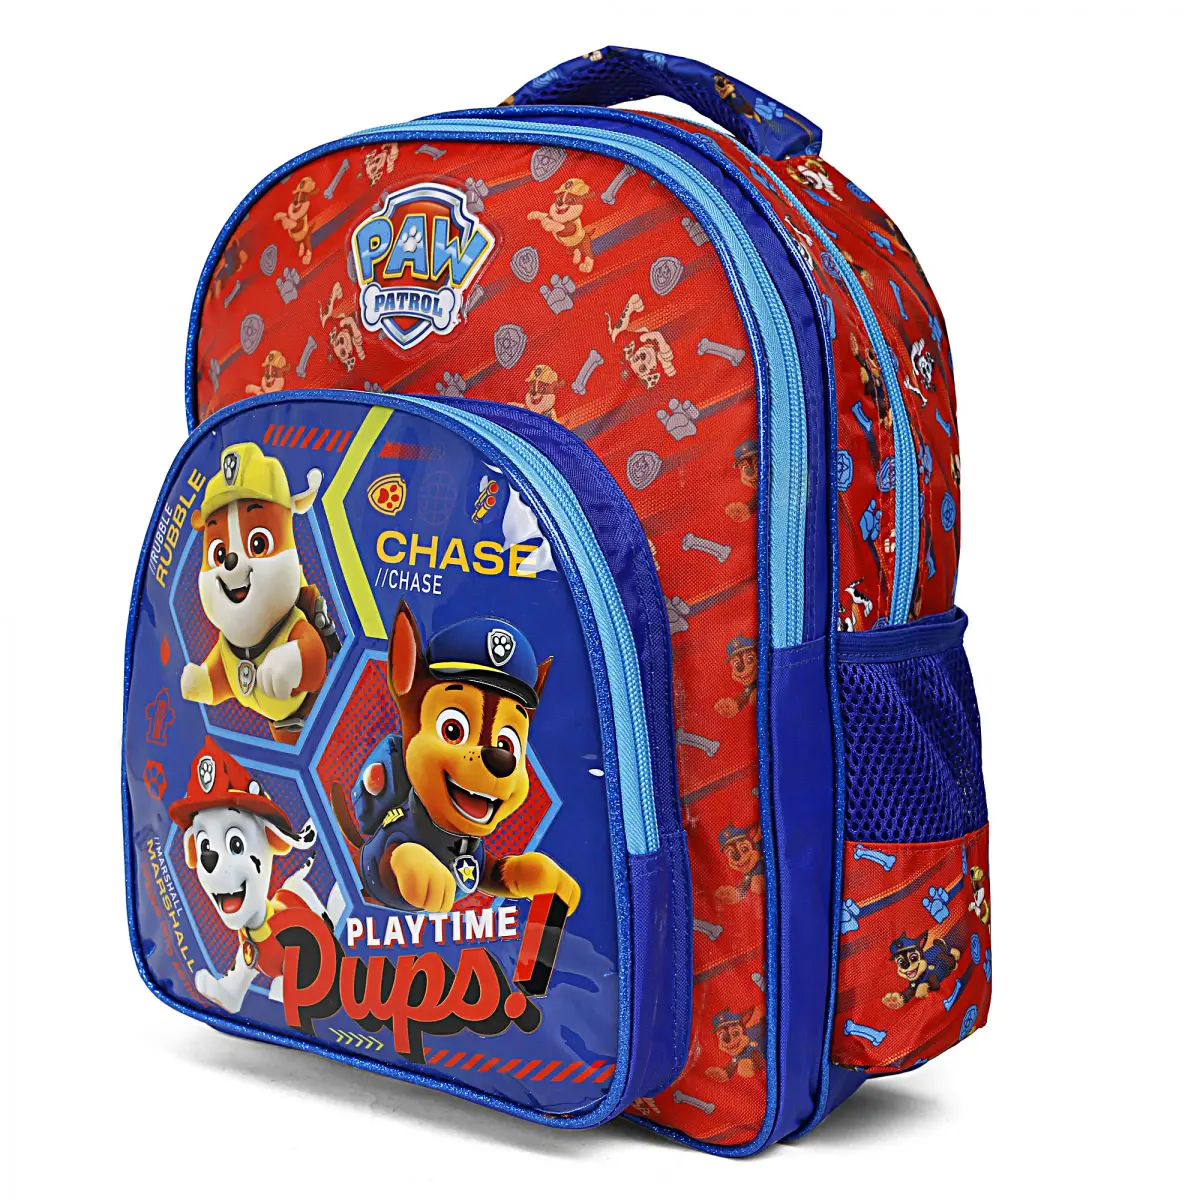 Paw Patrol Pups Bag Pack, 14Inches, Multicolour